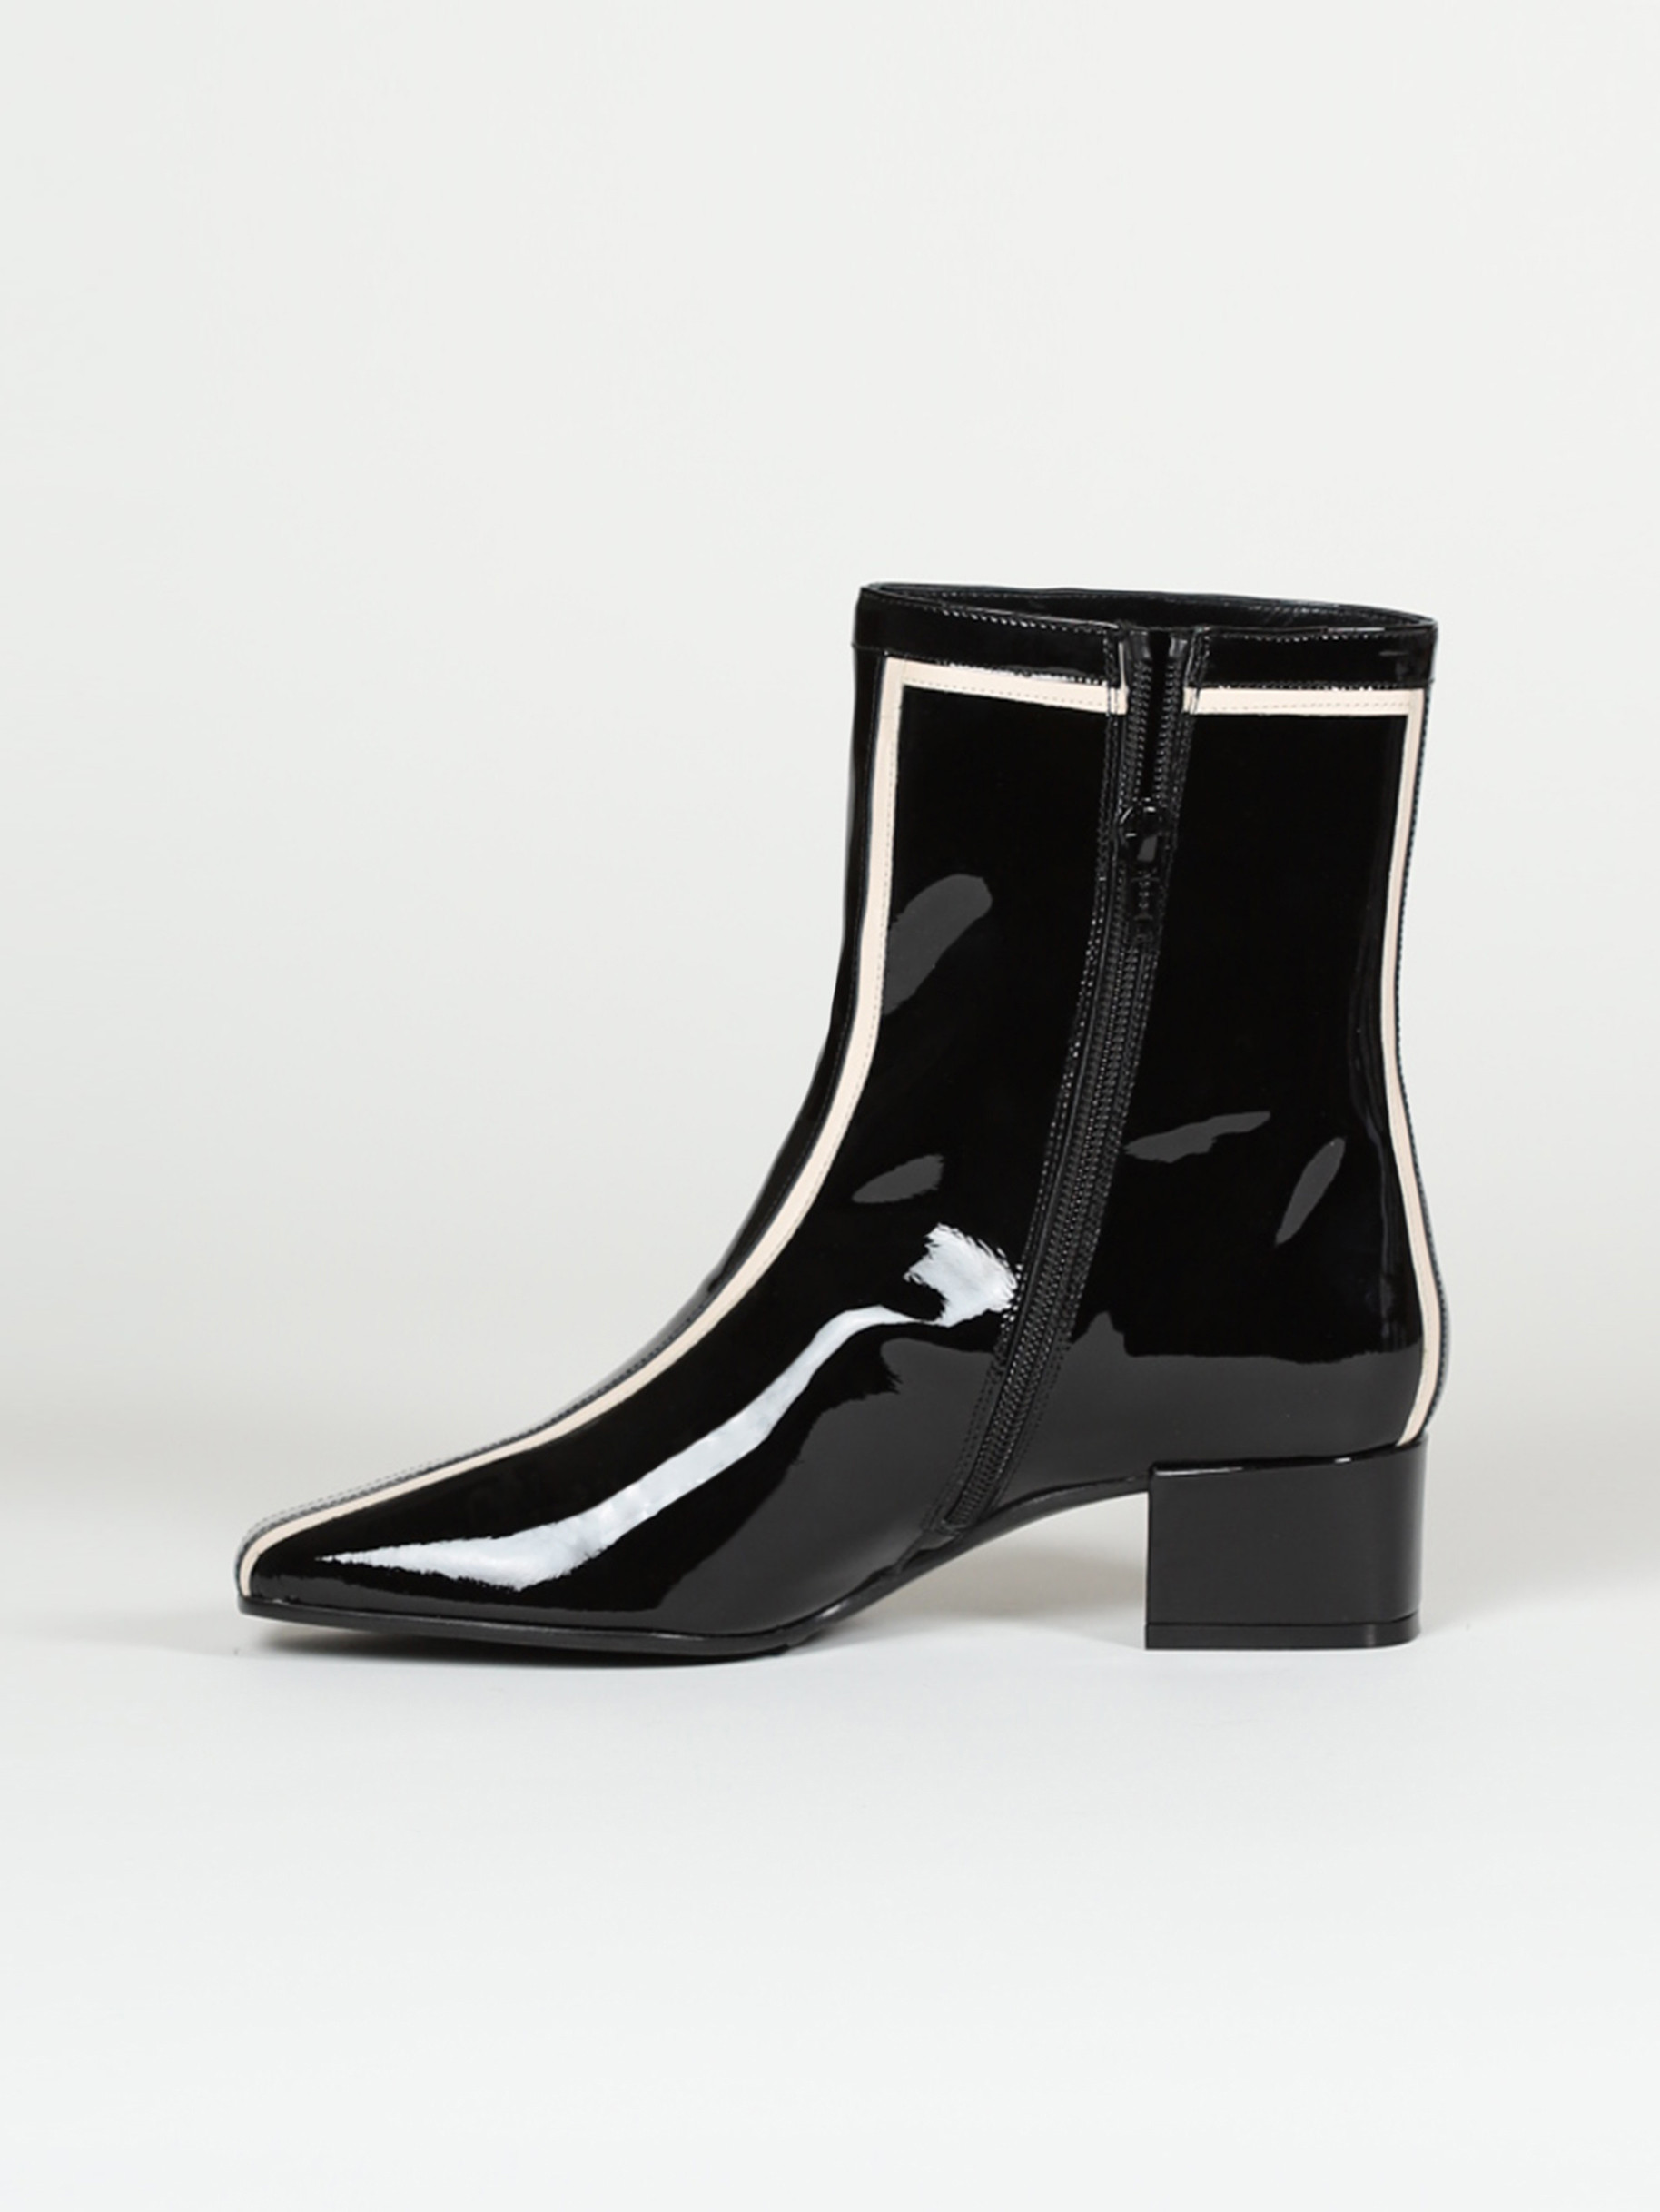 SOHO black and white patent leather ankle boots | Carel Paris Shoes